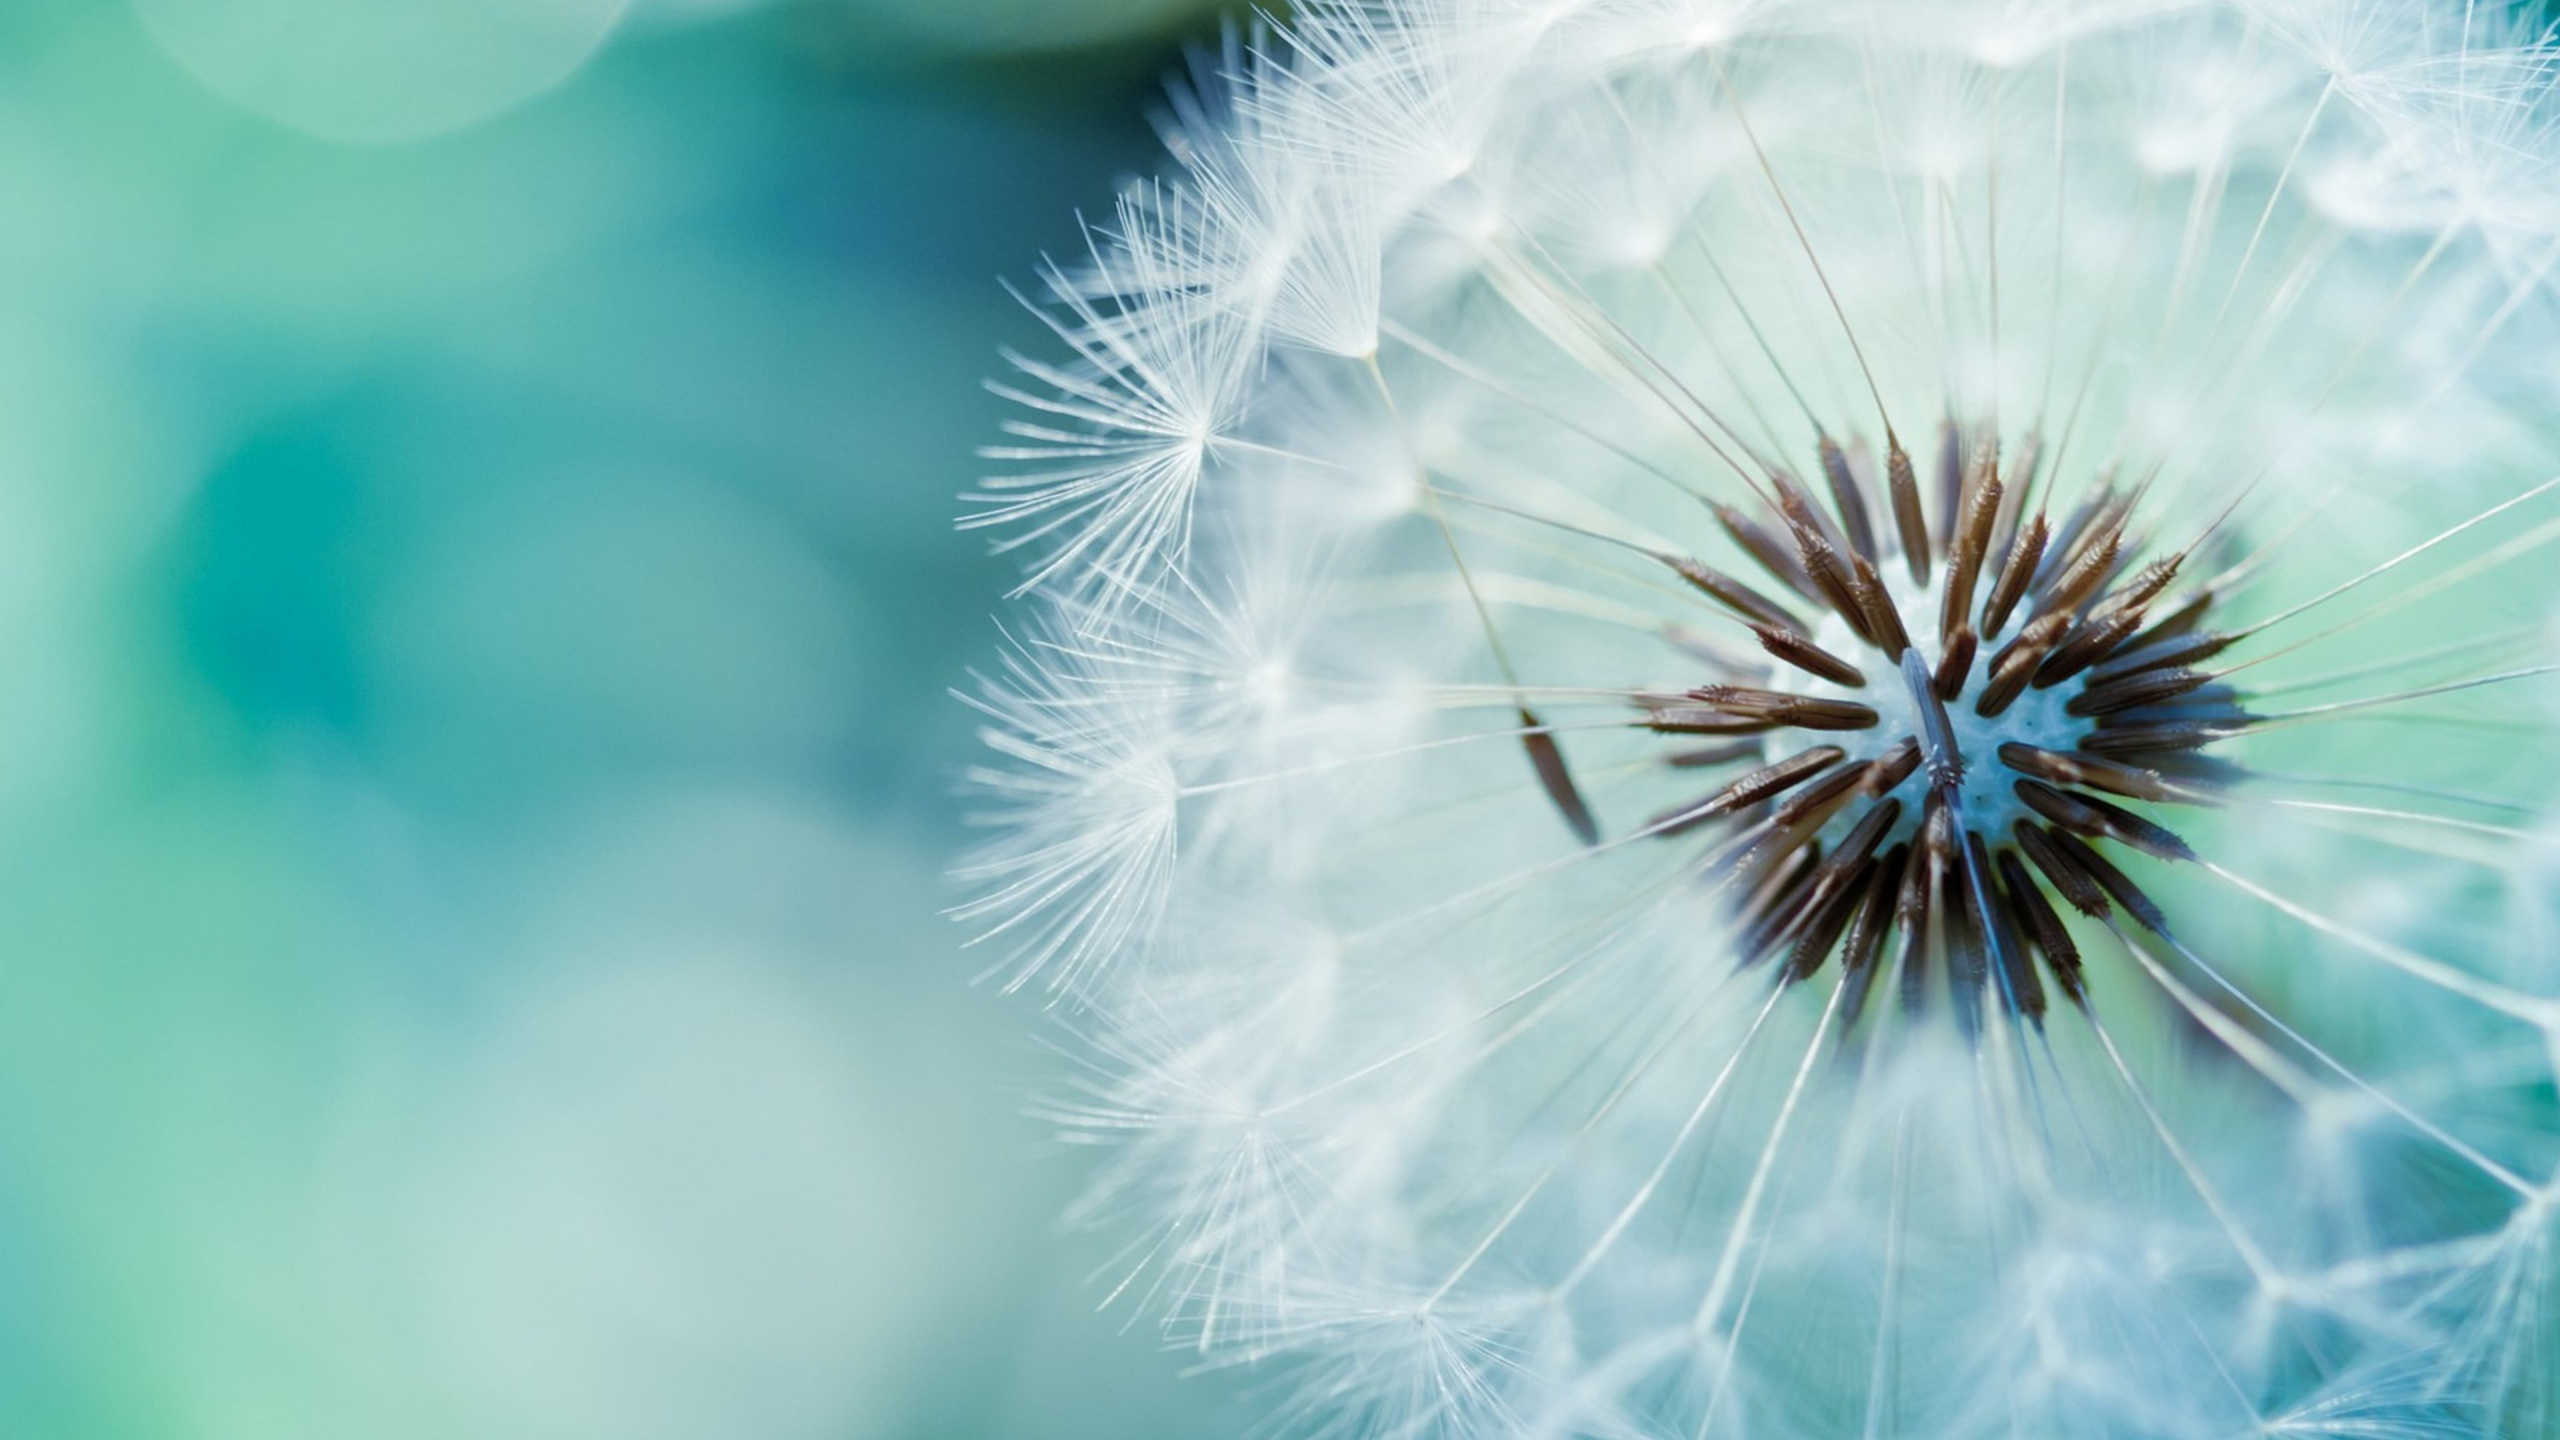 White Dandelion in Close up Photography. Wallpaper in 2560x1440 Resolution